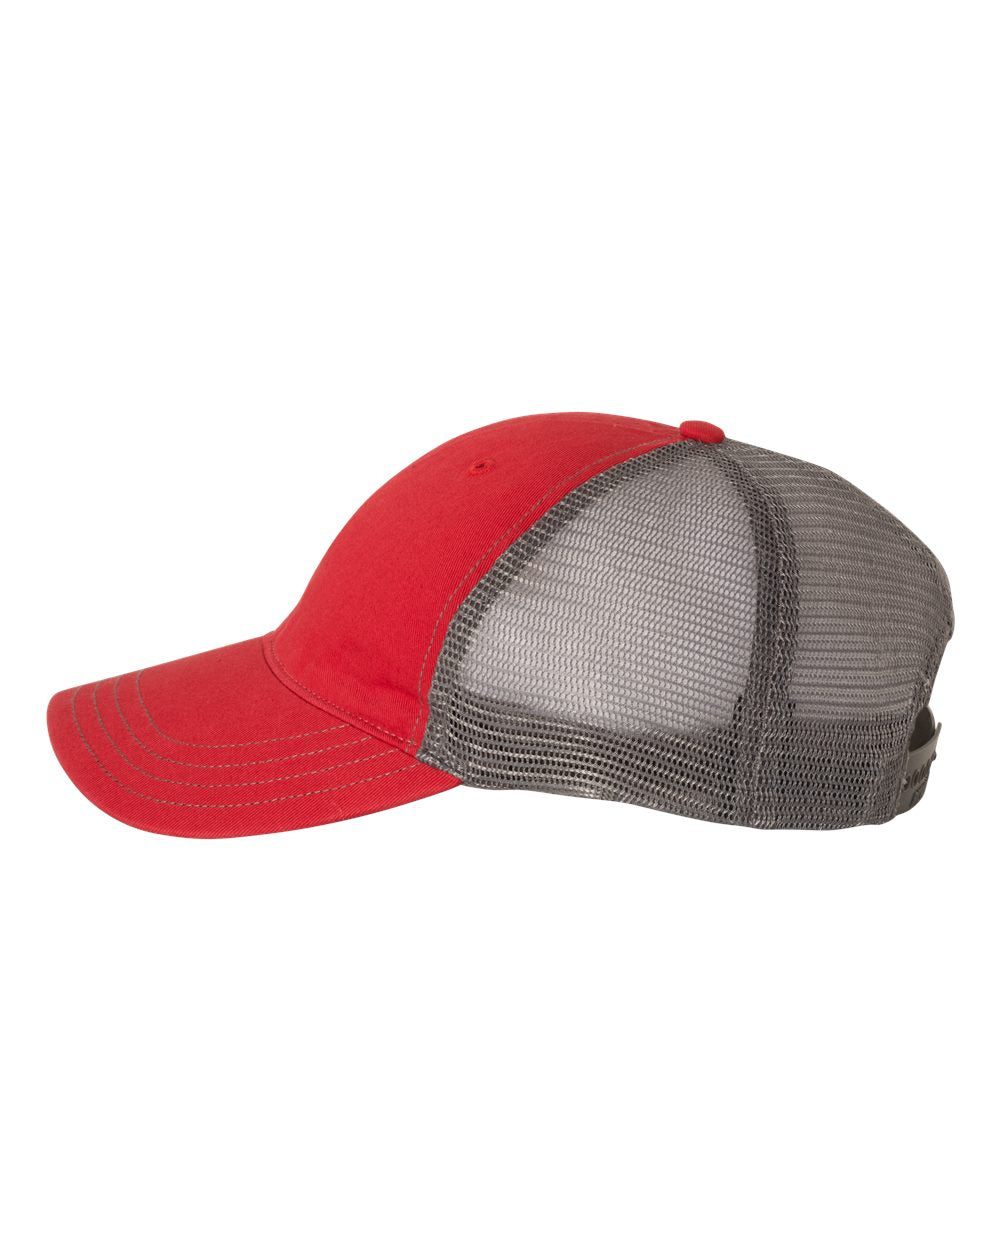 Richardson Garment-Washed Branded Trucker Caps, Red Charcoal